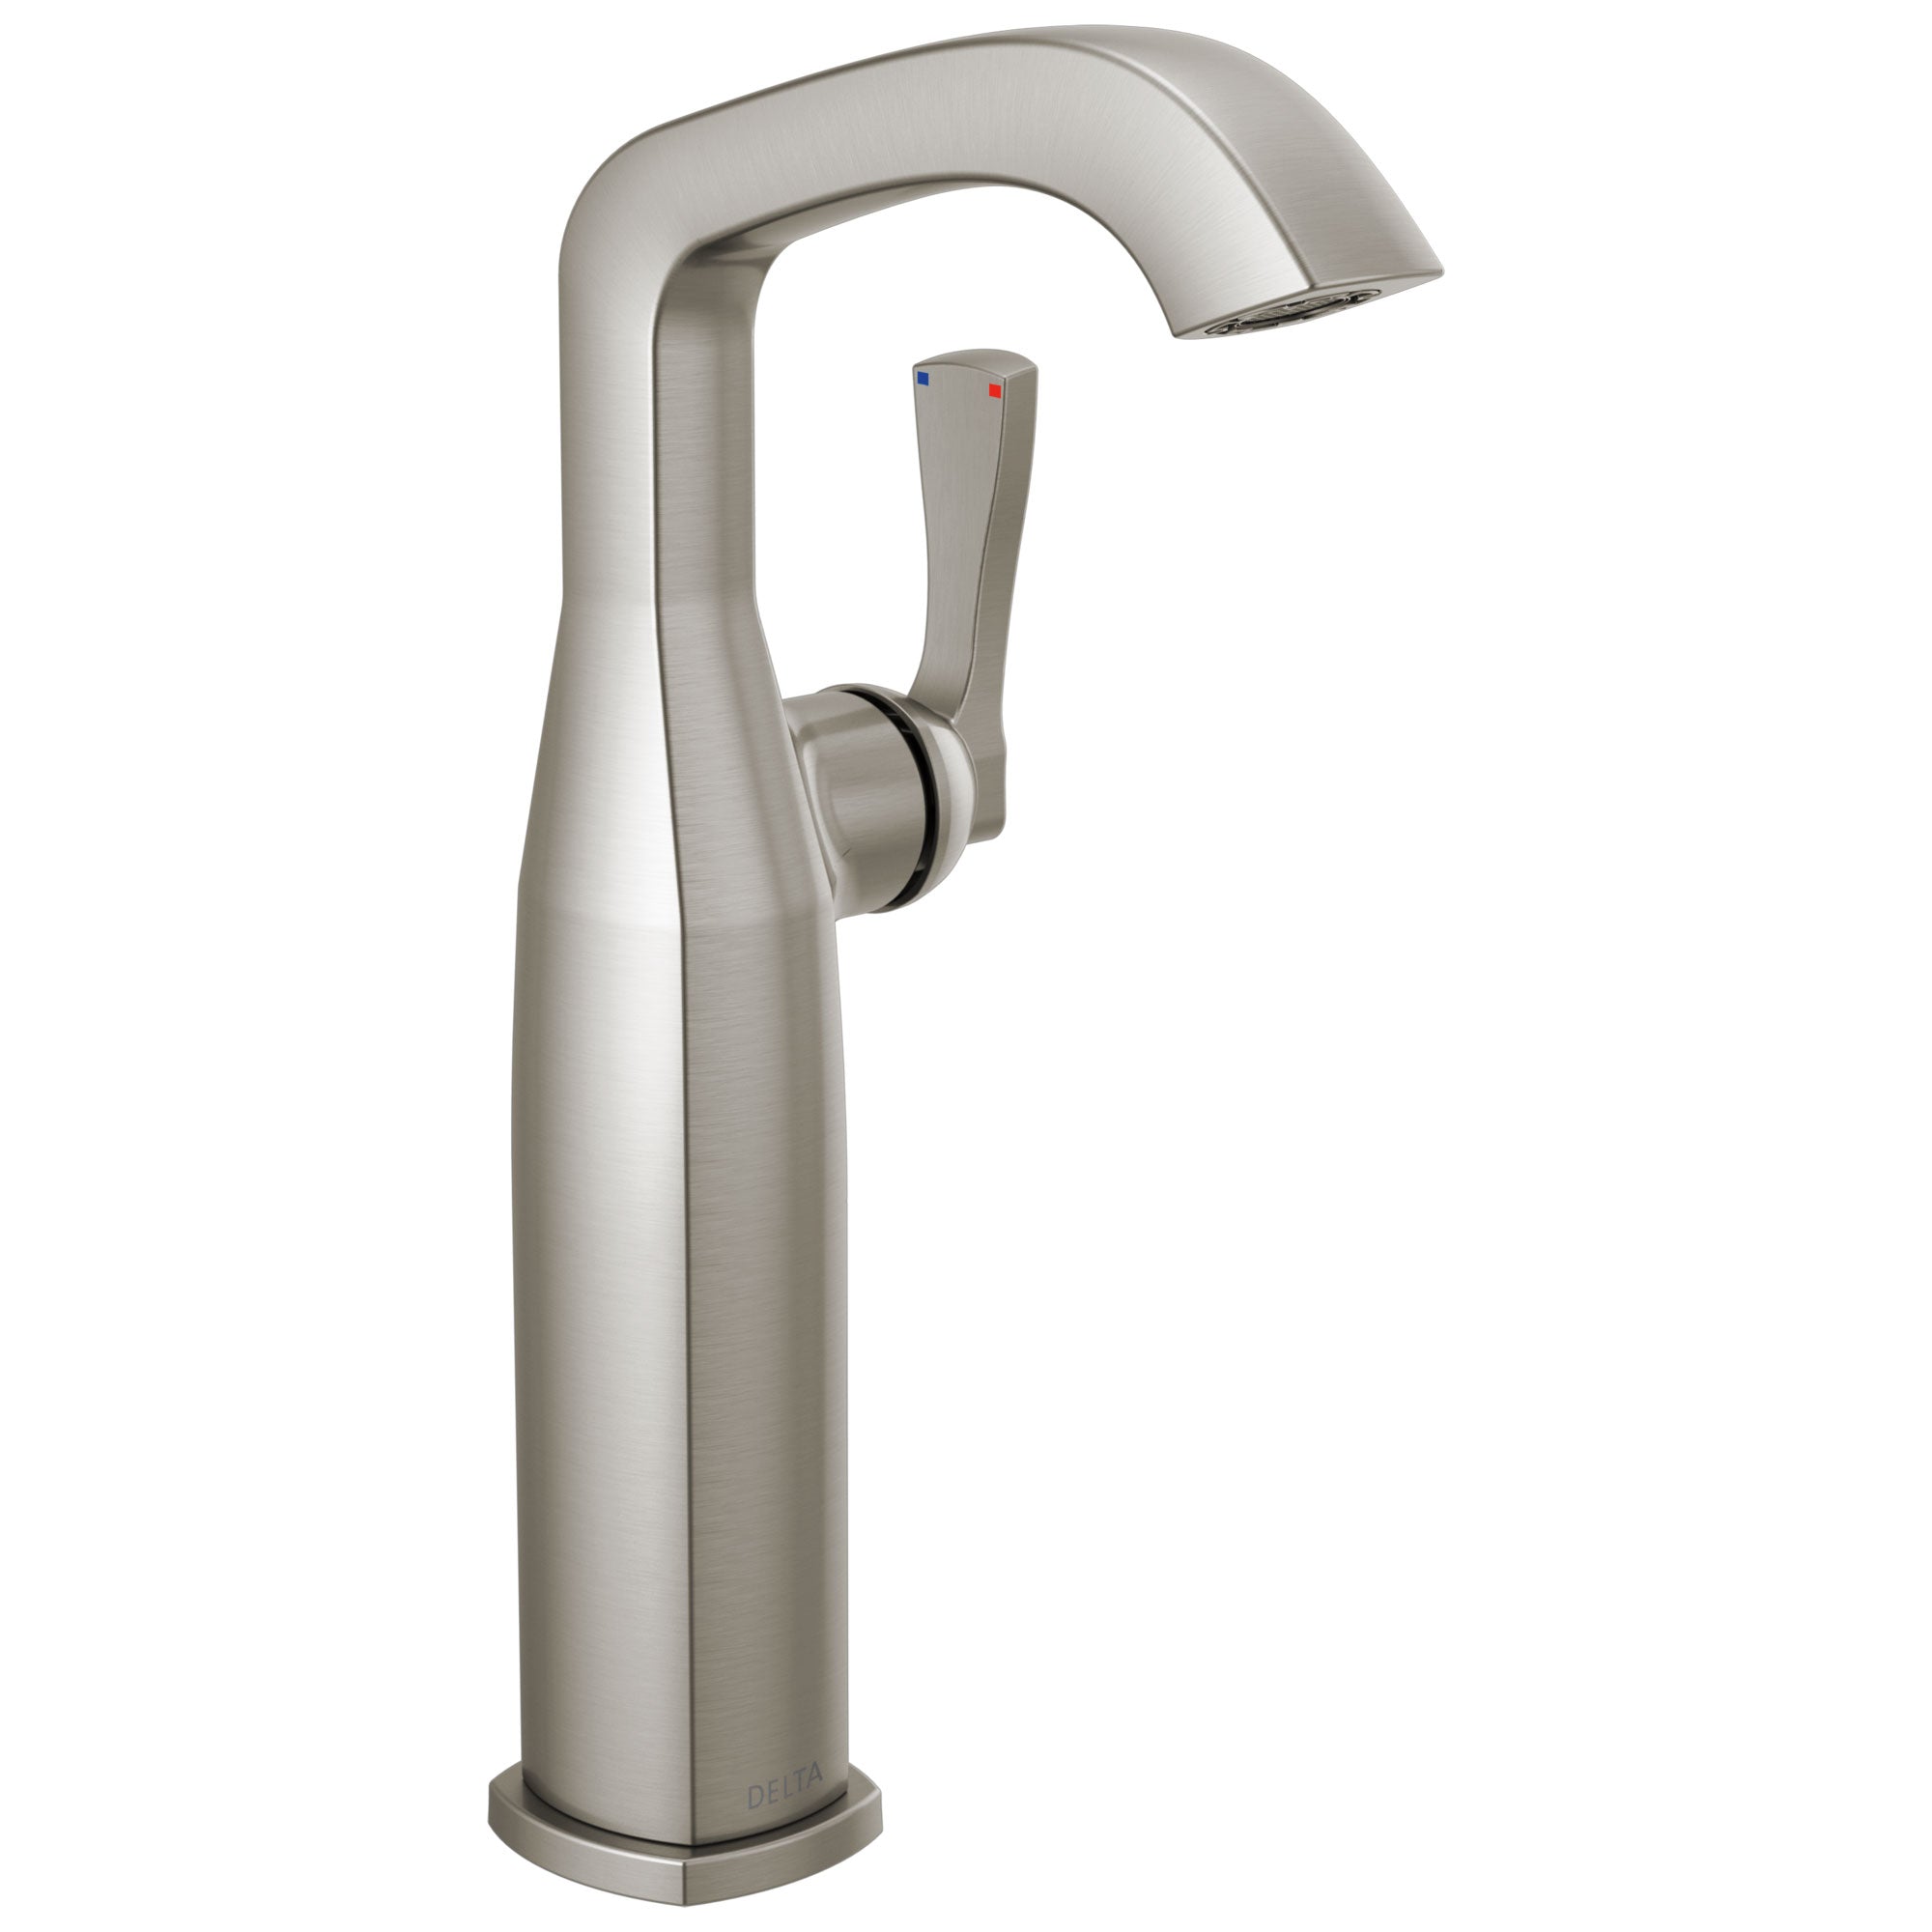 Delta Stryke Stainless Steel Finish Vessel Sink Faucet Includes Single Lever Handle D3581V